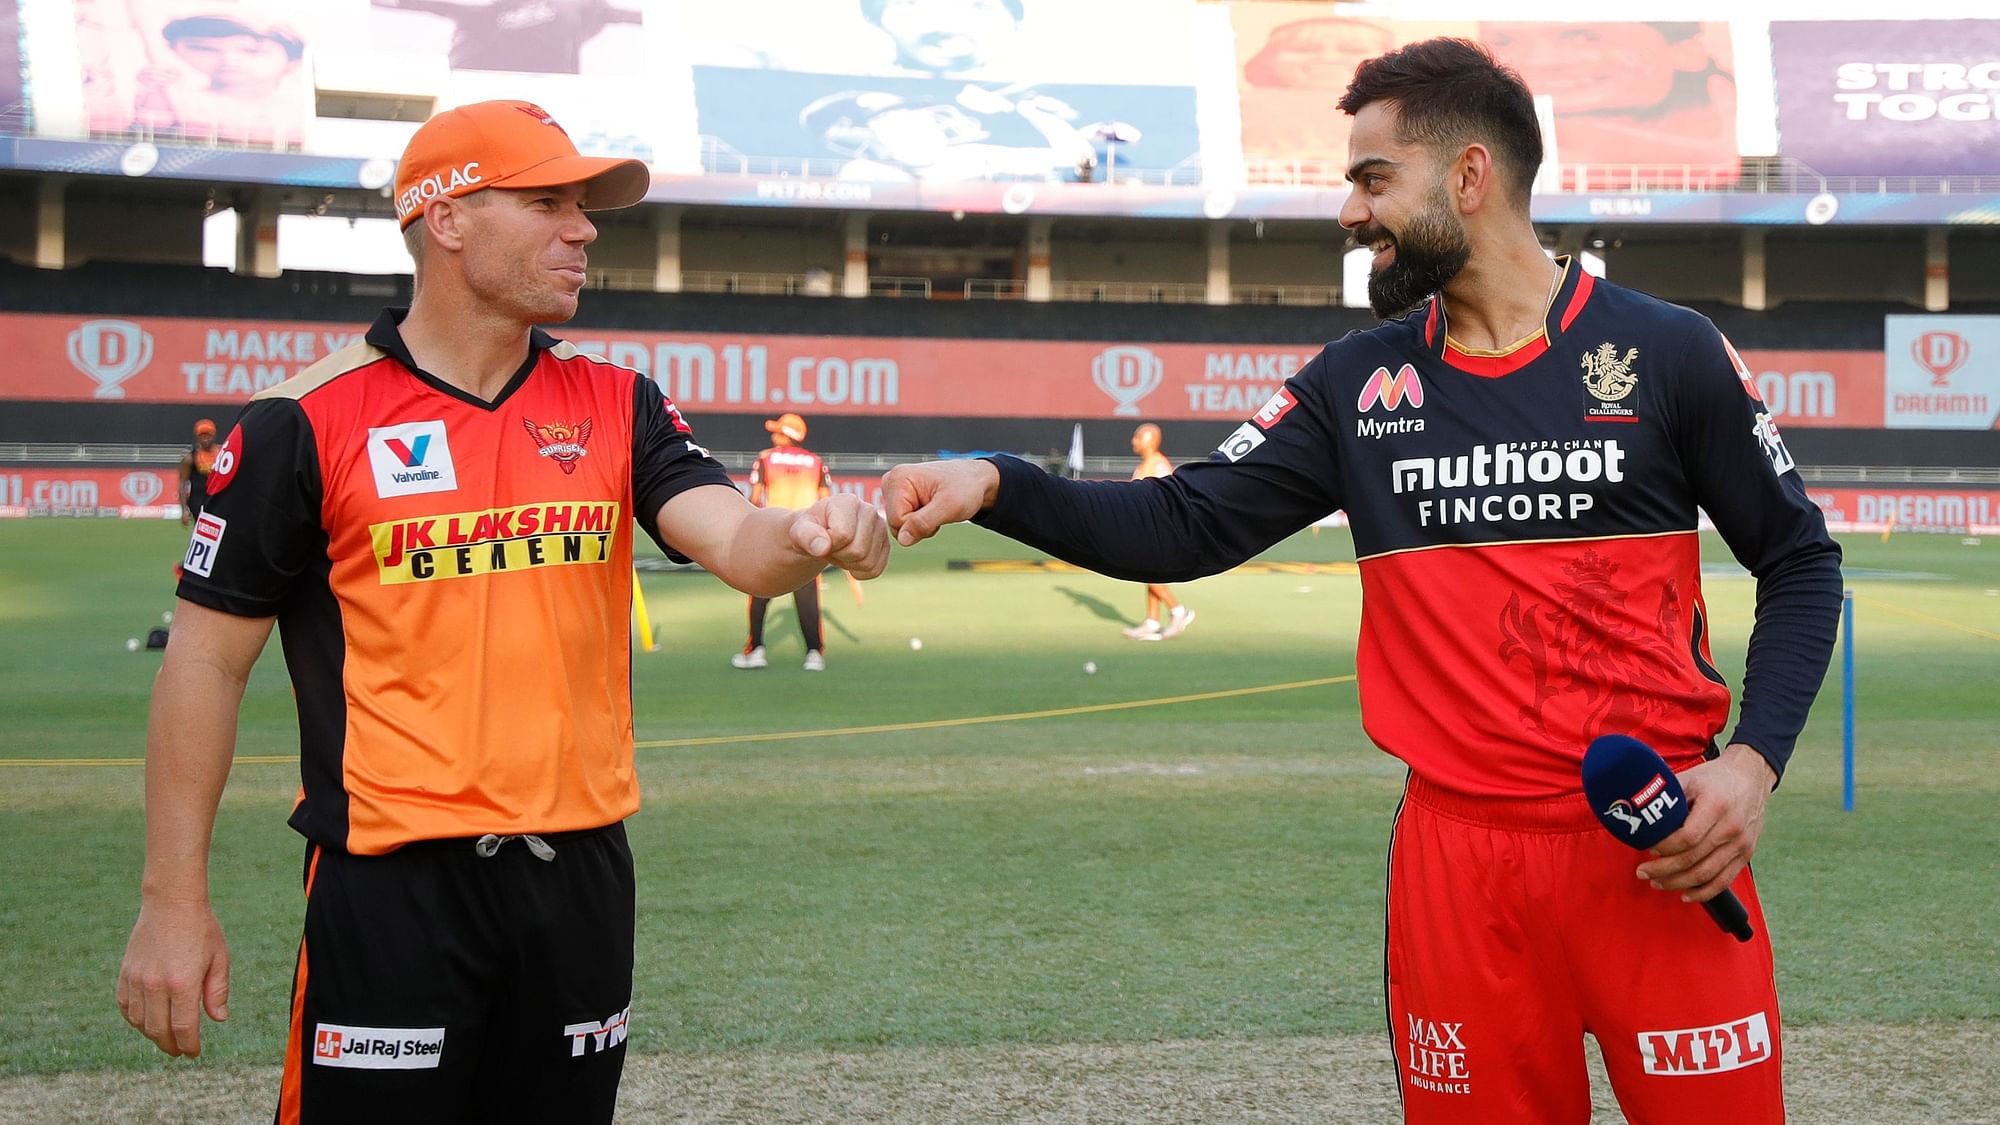 IPL 2020 Eliminator: Sunrisers Hyderabad play Royal Challengers Bangalore in a knockout game, the winner of which plays Delhi Capitals for a spot in the final.